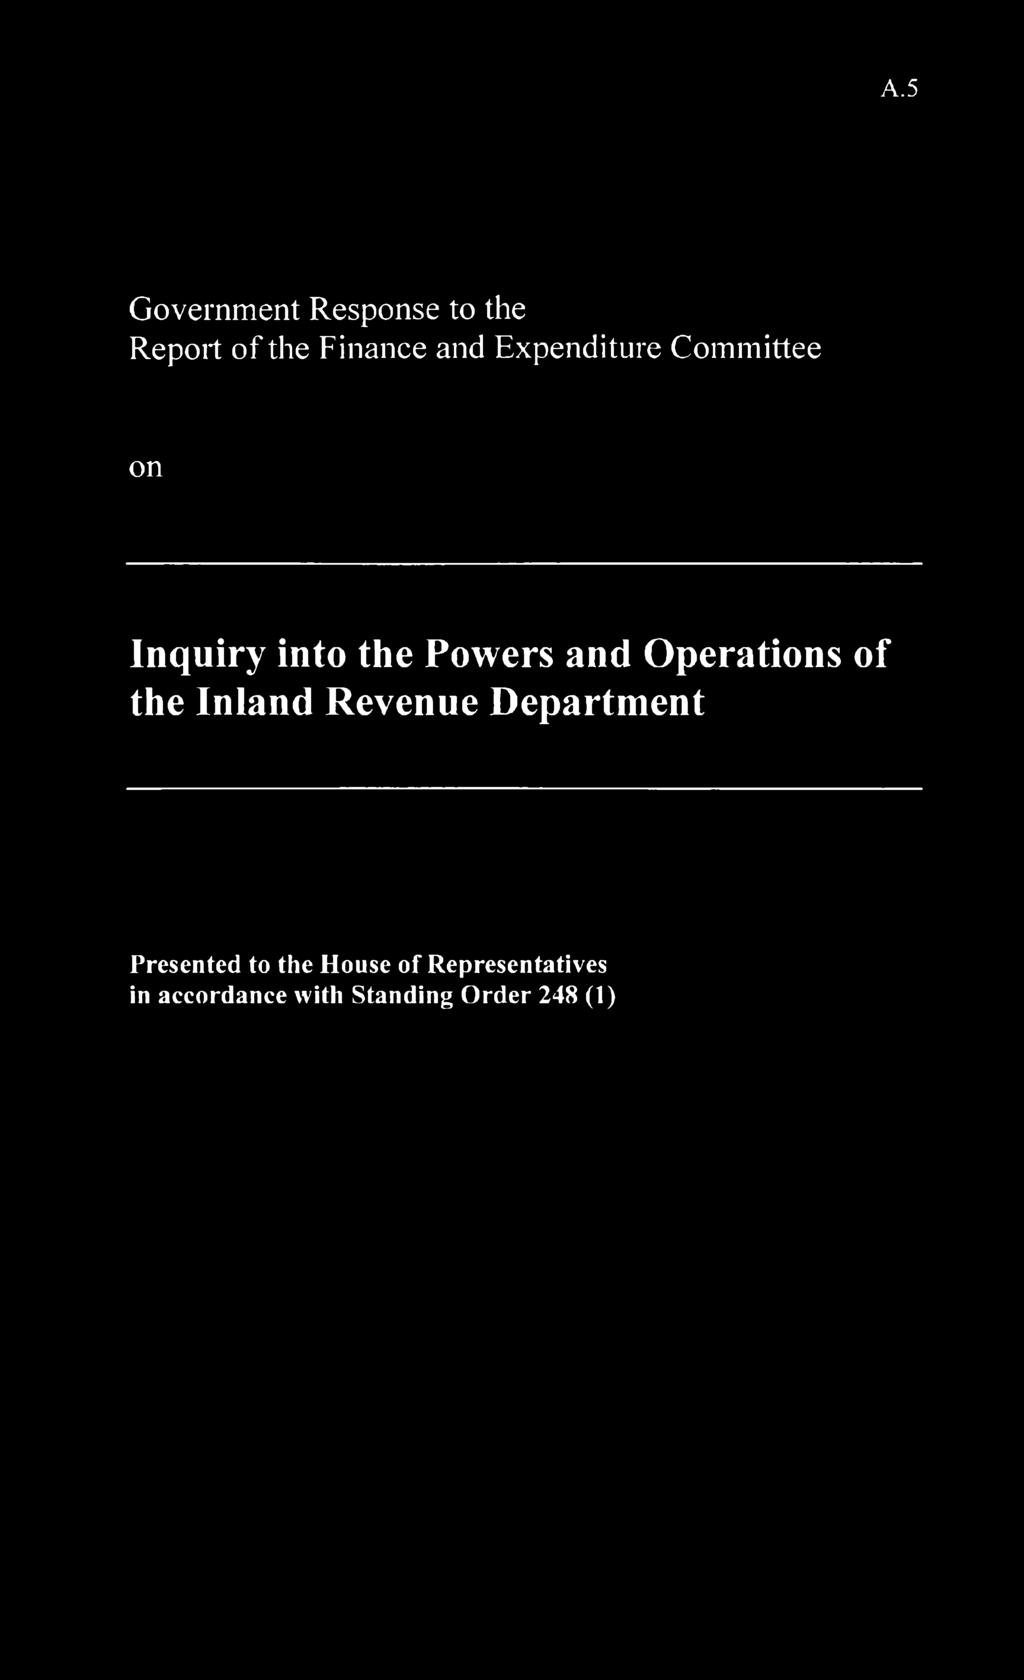 A.5 Government to the Report of the Finance and Expenditure Committee on Inquiry into the Powers and Operations